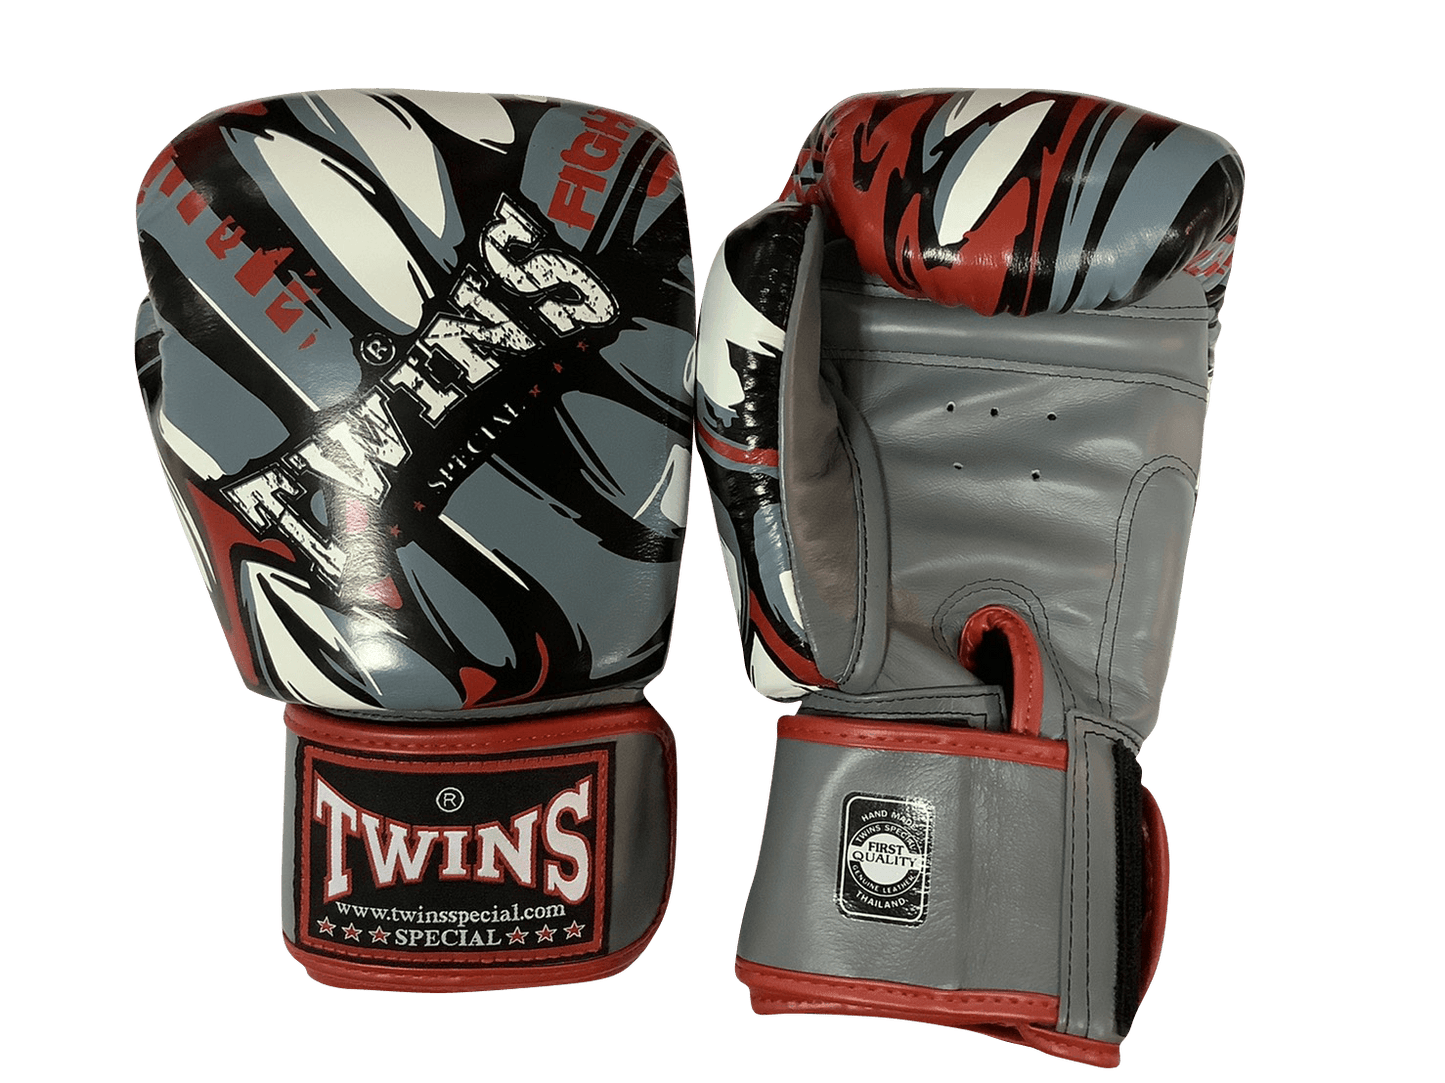 Twins Special Boxing Gloves FBGVL3-55/GY Twins Special